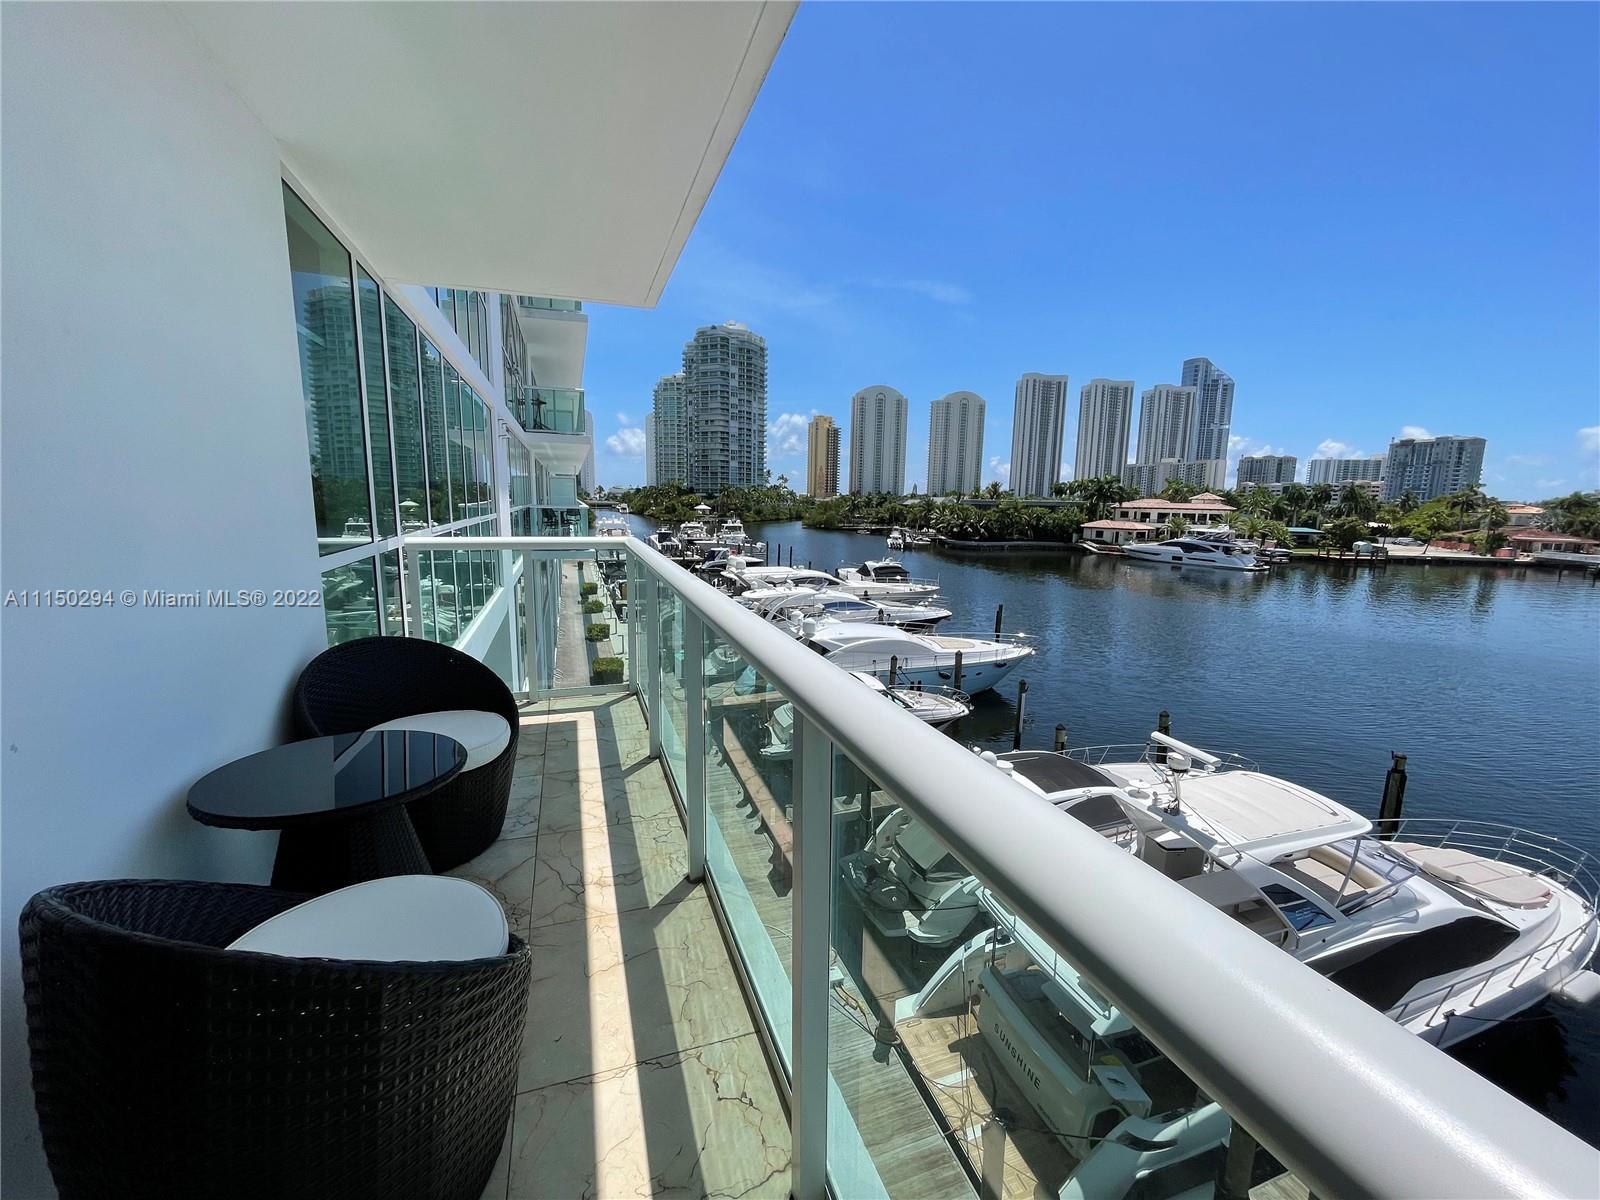 A BOATERS DREAM-ONE OF A KIND TURNKEY FULLY FURNISHED UNIT W/DIRECT INTRACOASTAL VIEWS FROM EVERY ROOM,EXPANSIVE TERRACE OVERLOOKING PRIVATE MARINA. 3 BD CONVERTED TO 2 BD W/LARGE LIVING/DINING ROOM(CAN BE CONVERTED BACK TO 3 BD). MANY UPGRADES:MODERN KITCHEN W/ STATE OF THE ART APPLIANCES, MARBLE FLOORS, CALIFORNIA CLOSETS, CUSTOMIZED LIGHT FIXTURES, SMART HOME SYSTEM- SECURITY CAMERA, AC CONTROLLED VIA APP, ELECTRICAL BLINDS, TOTO TOILETS. BRAND NEW ITALIAN FURNITURE INCLUDED. 2 PARKING SPACES ON SAME FLOOR AS UNIT. PRIVATE&LUXURY BOUTIQUE BUILDING IN SUNNY ISLES ON THE INTRACOASTAL- INFINITY POOL, SNACK BAR, HOT TUB, SAUNA& STEAM ROOMS, TENNIS COURTS, FITNESS CENTER W/AEROBIC & YOGA ROOMS,MASSAGE ROOMS,CABANAS,CONCIERGE, DRY &WET MARINAS, BUSINESS CENTER, 24 HR VALET, LOBBY ATTENDED.